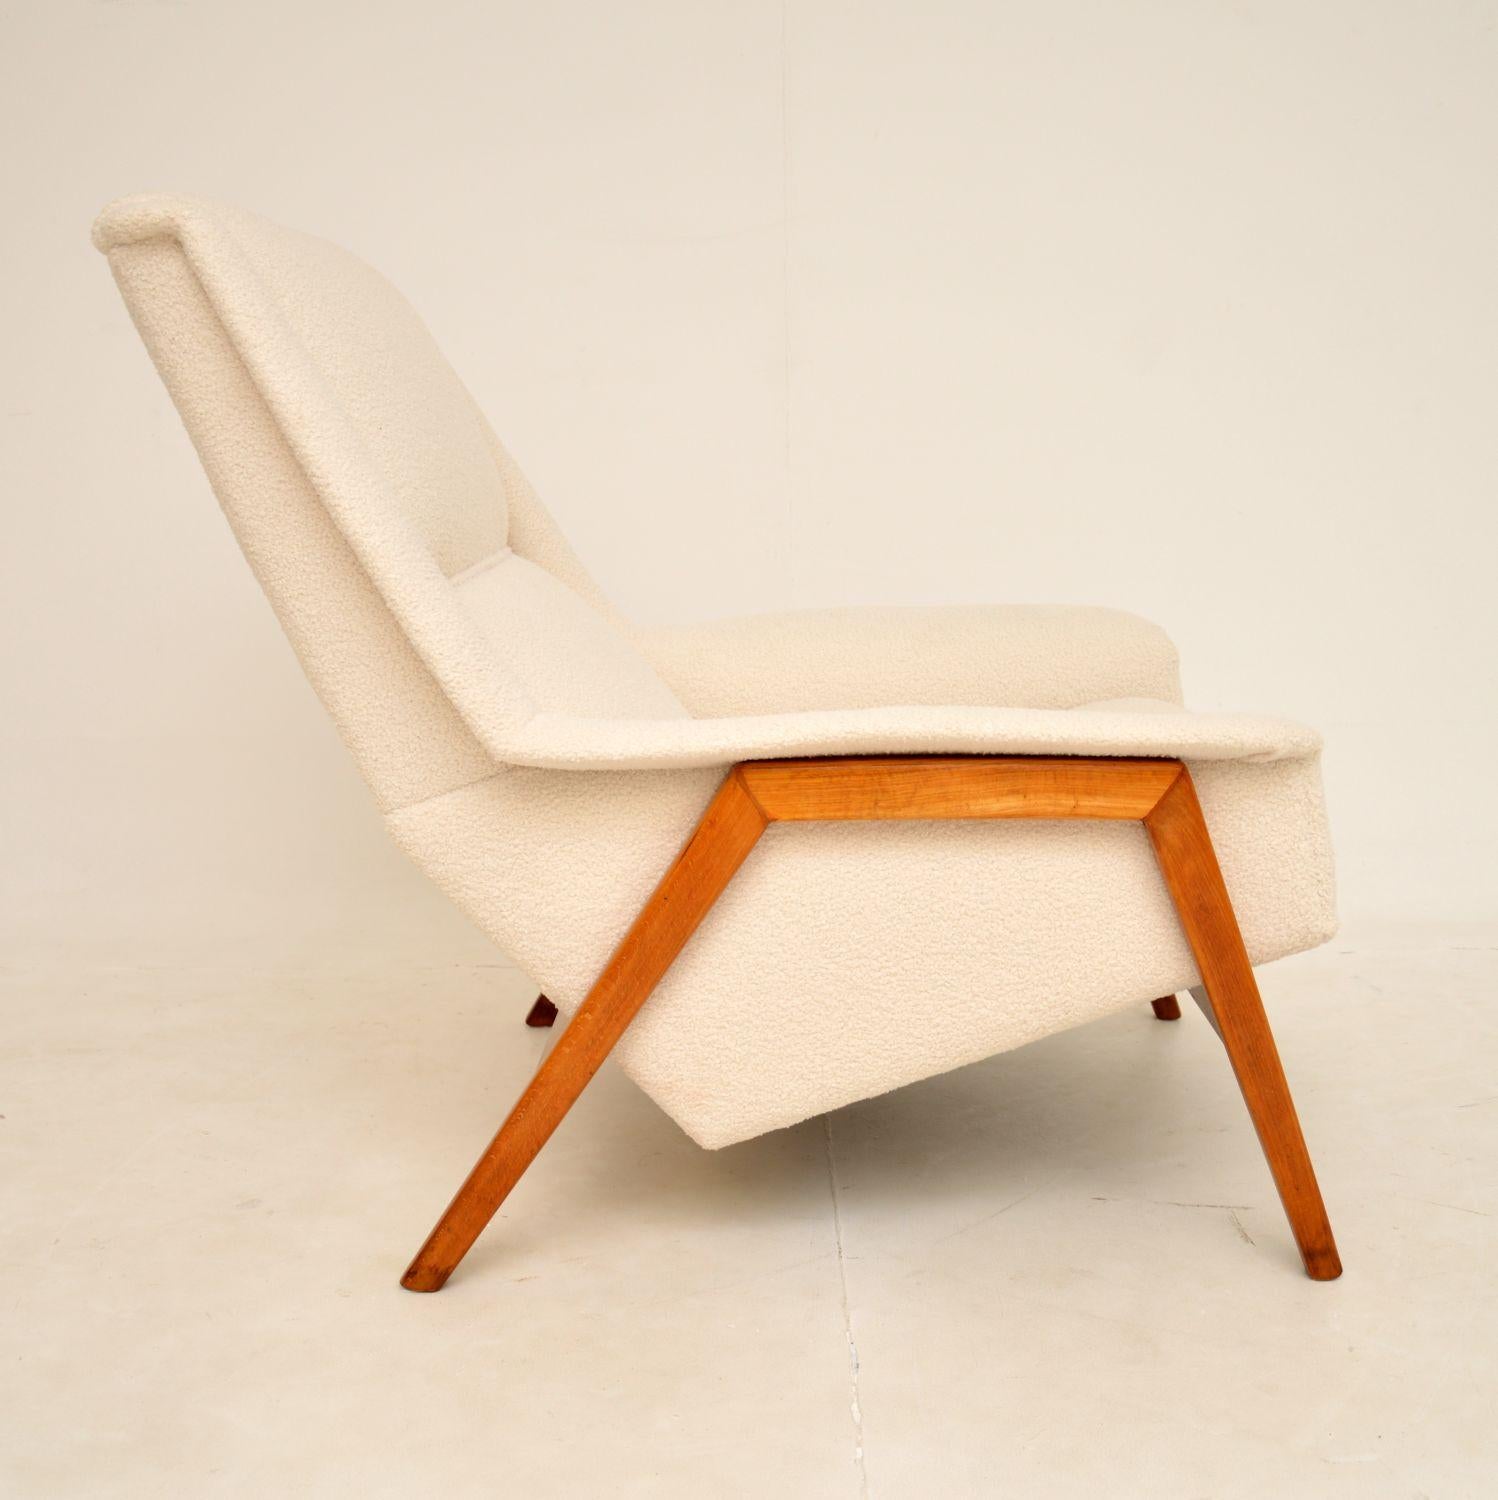 A very stylish and extremely comfortable vintage armchair, made in Sweden and dating from the 1960-70’s.

It is very well made with a beautiful design, this is so comfortable and supportive. It has a generous seat area, and sits on a lovely teak